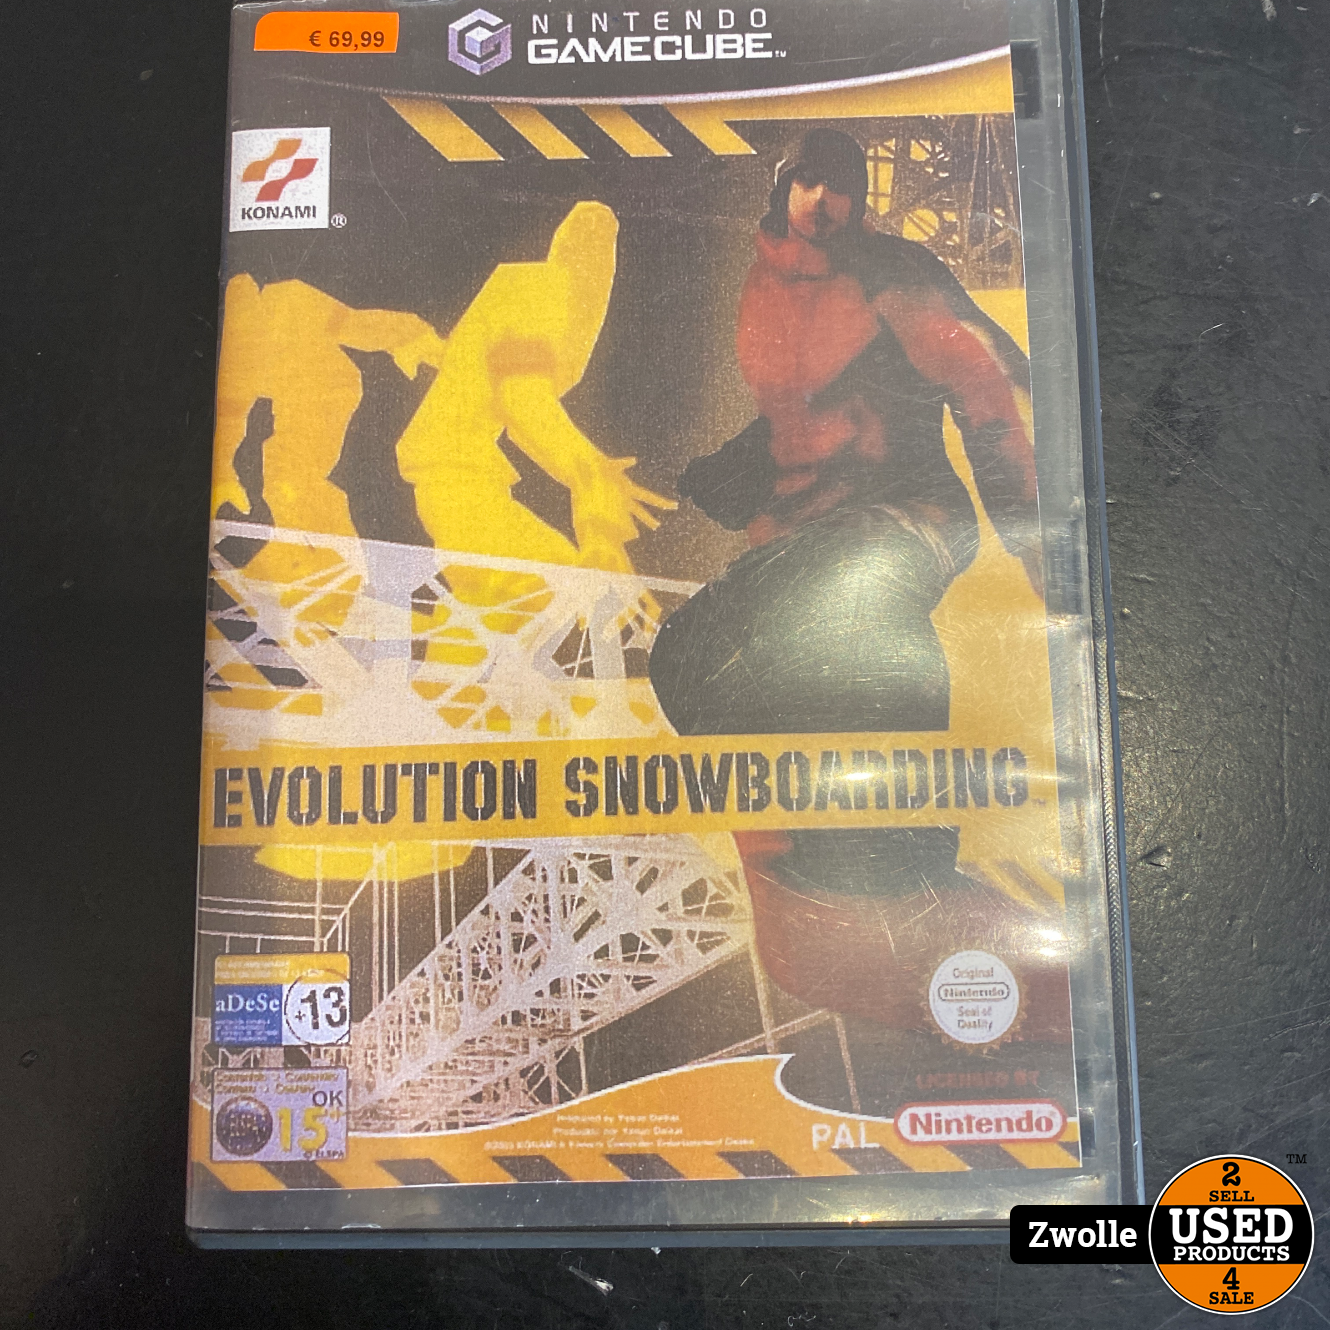 Uitwisseling Alexander Graham Bell Oswald Nintendo Gamecube Evolution Snowboarding - Used Products Zwolle